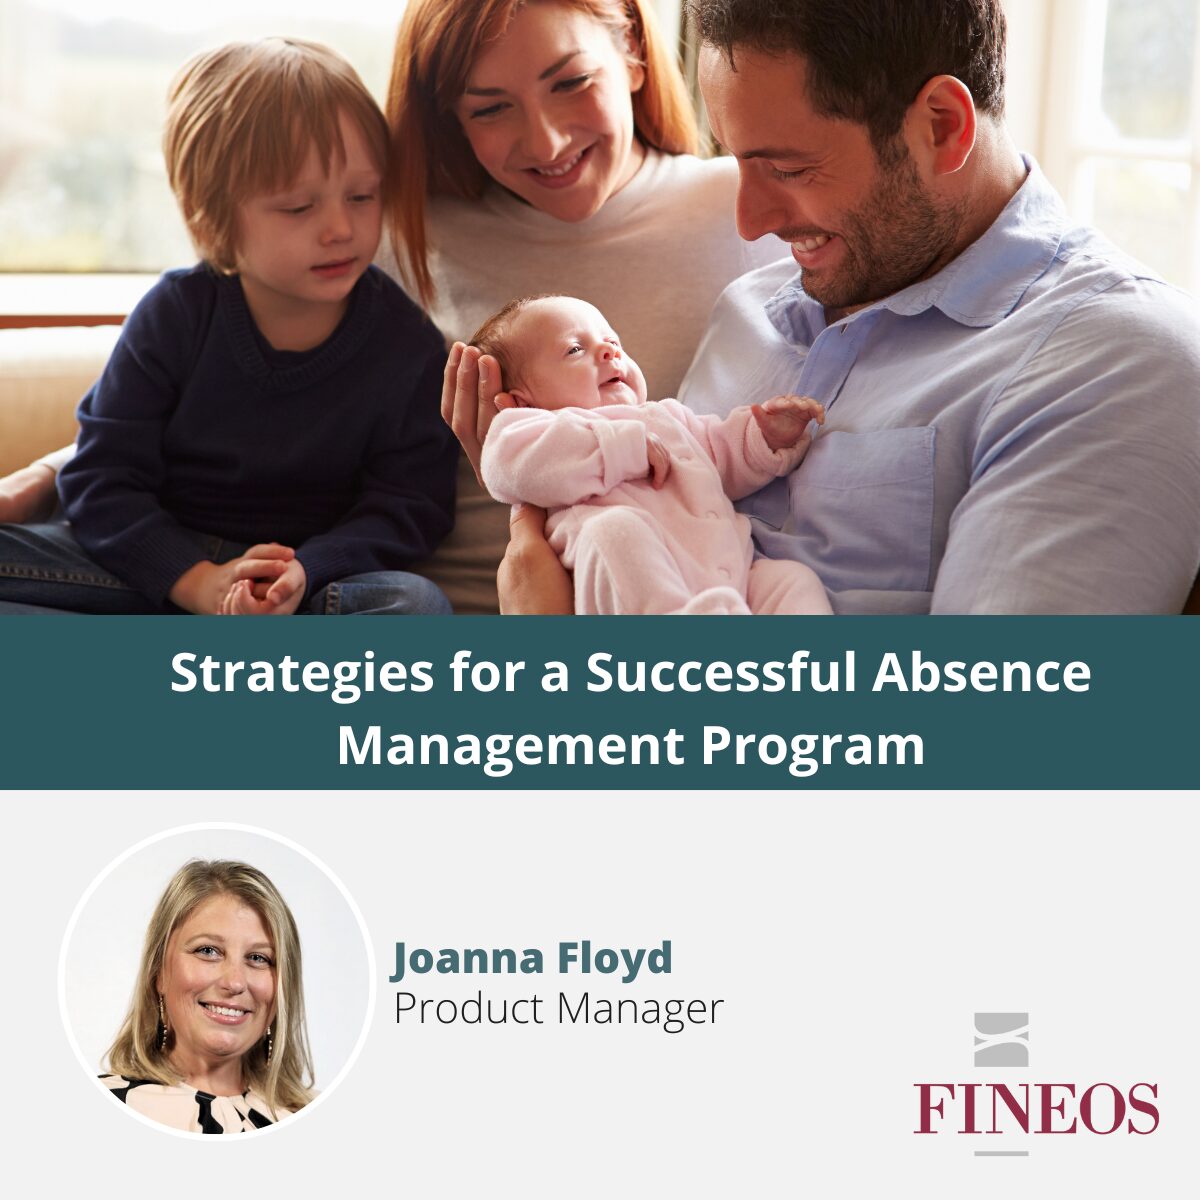 Strategies for a Successful Absence Management Program